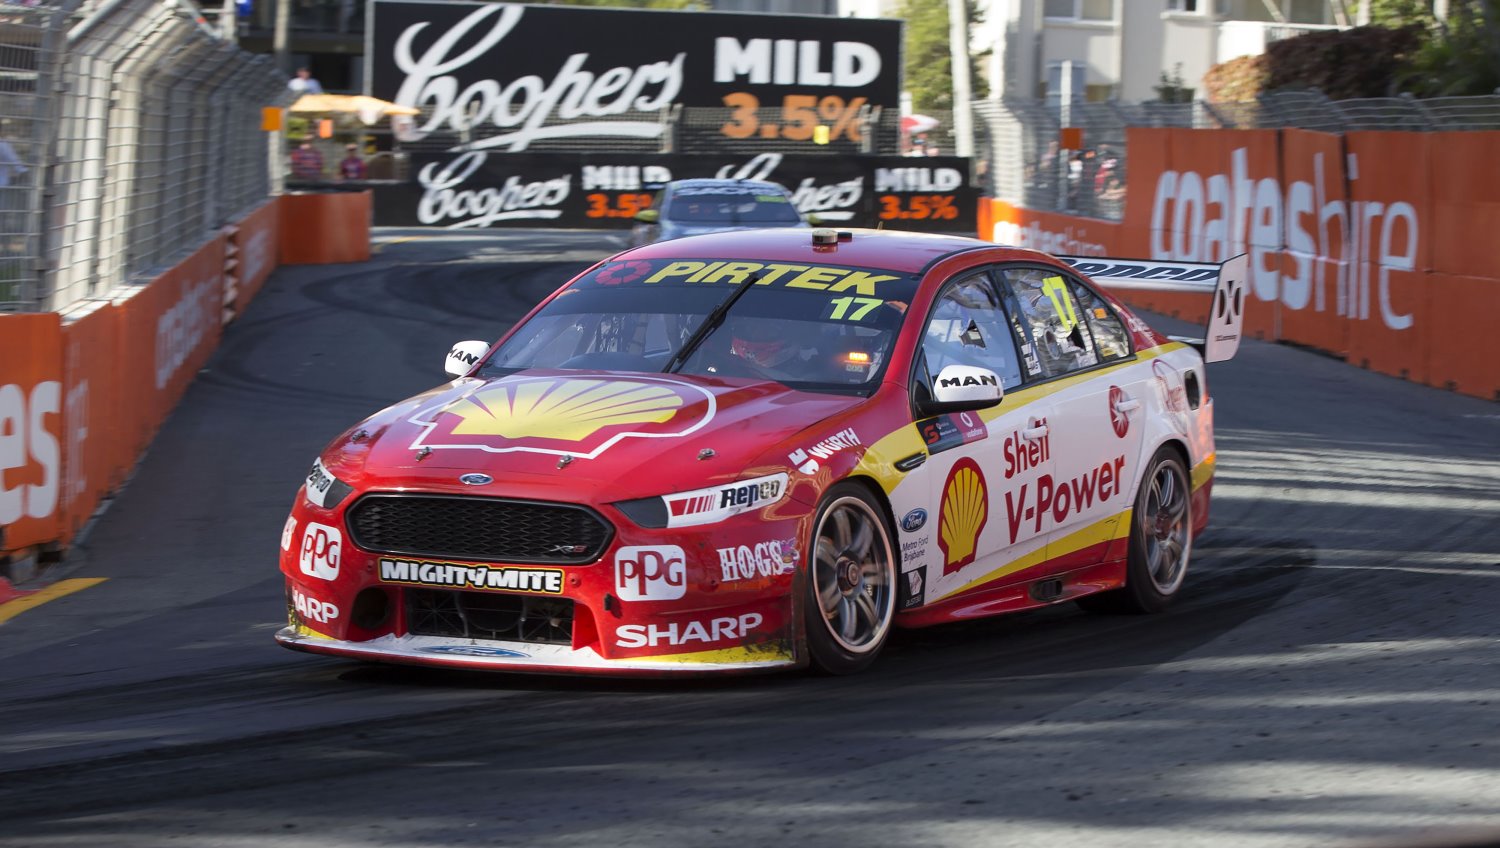 McLaughlin now holds slim points lead